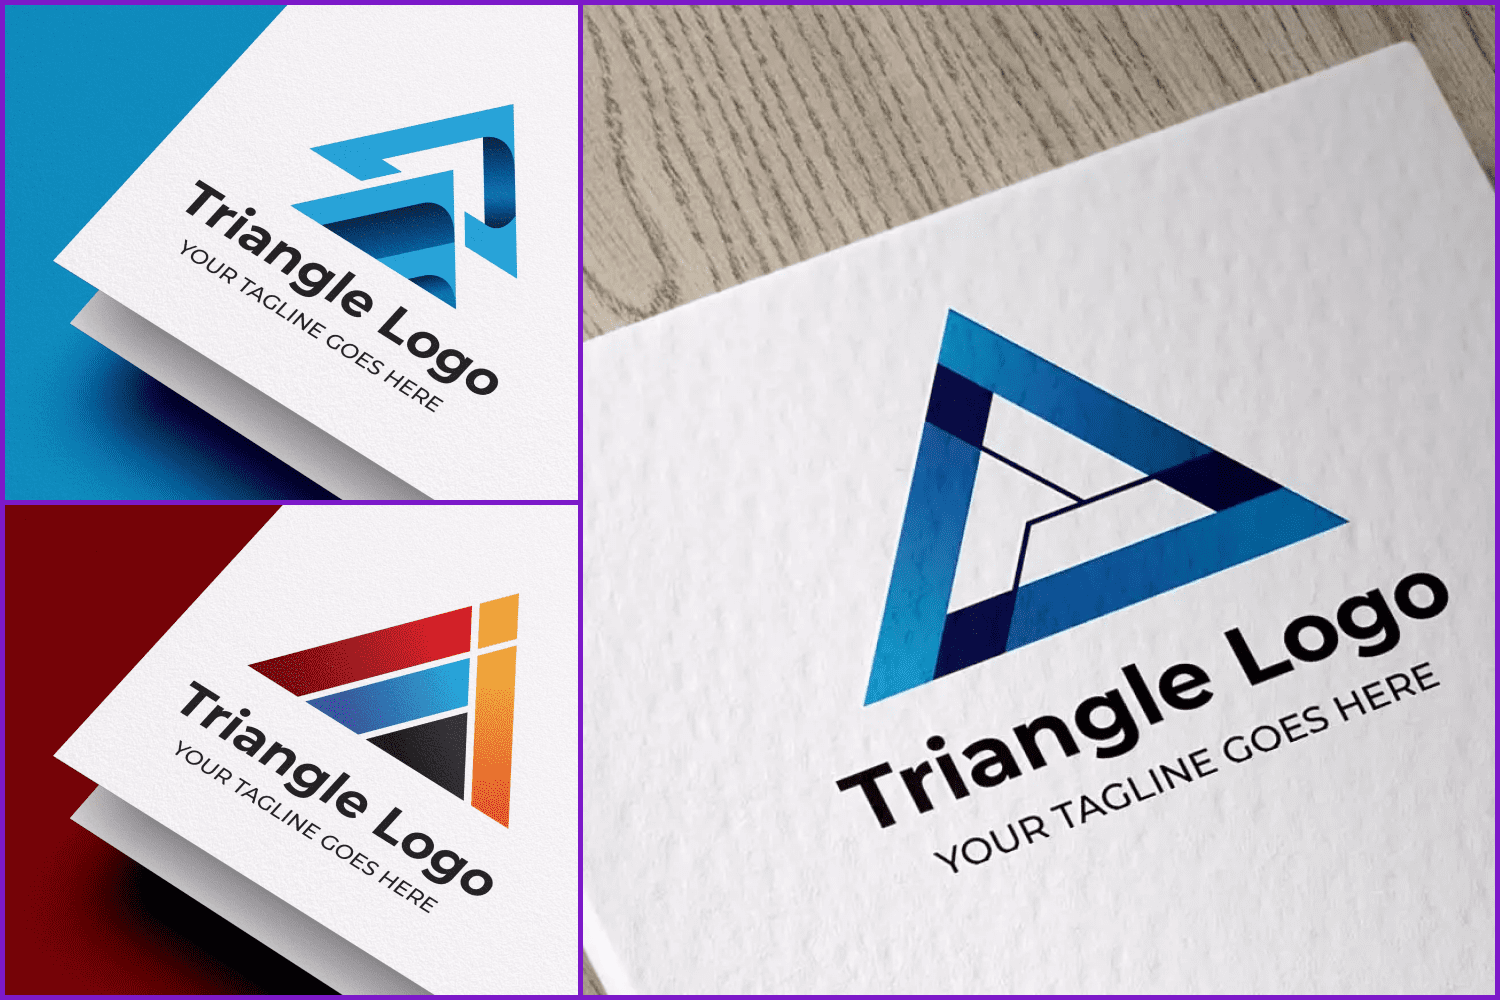 Collage of images of logos in the form of multi-colored triangles.